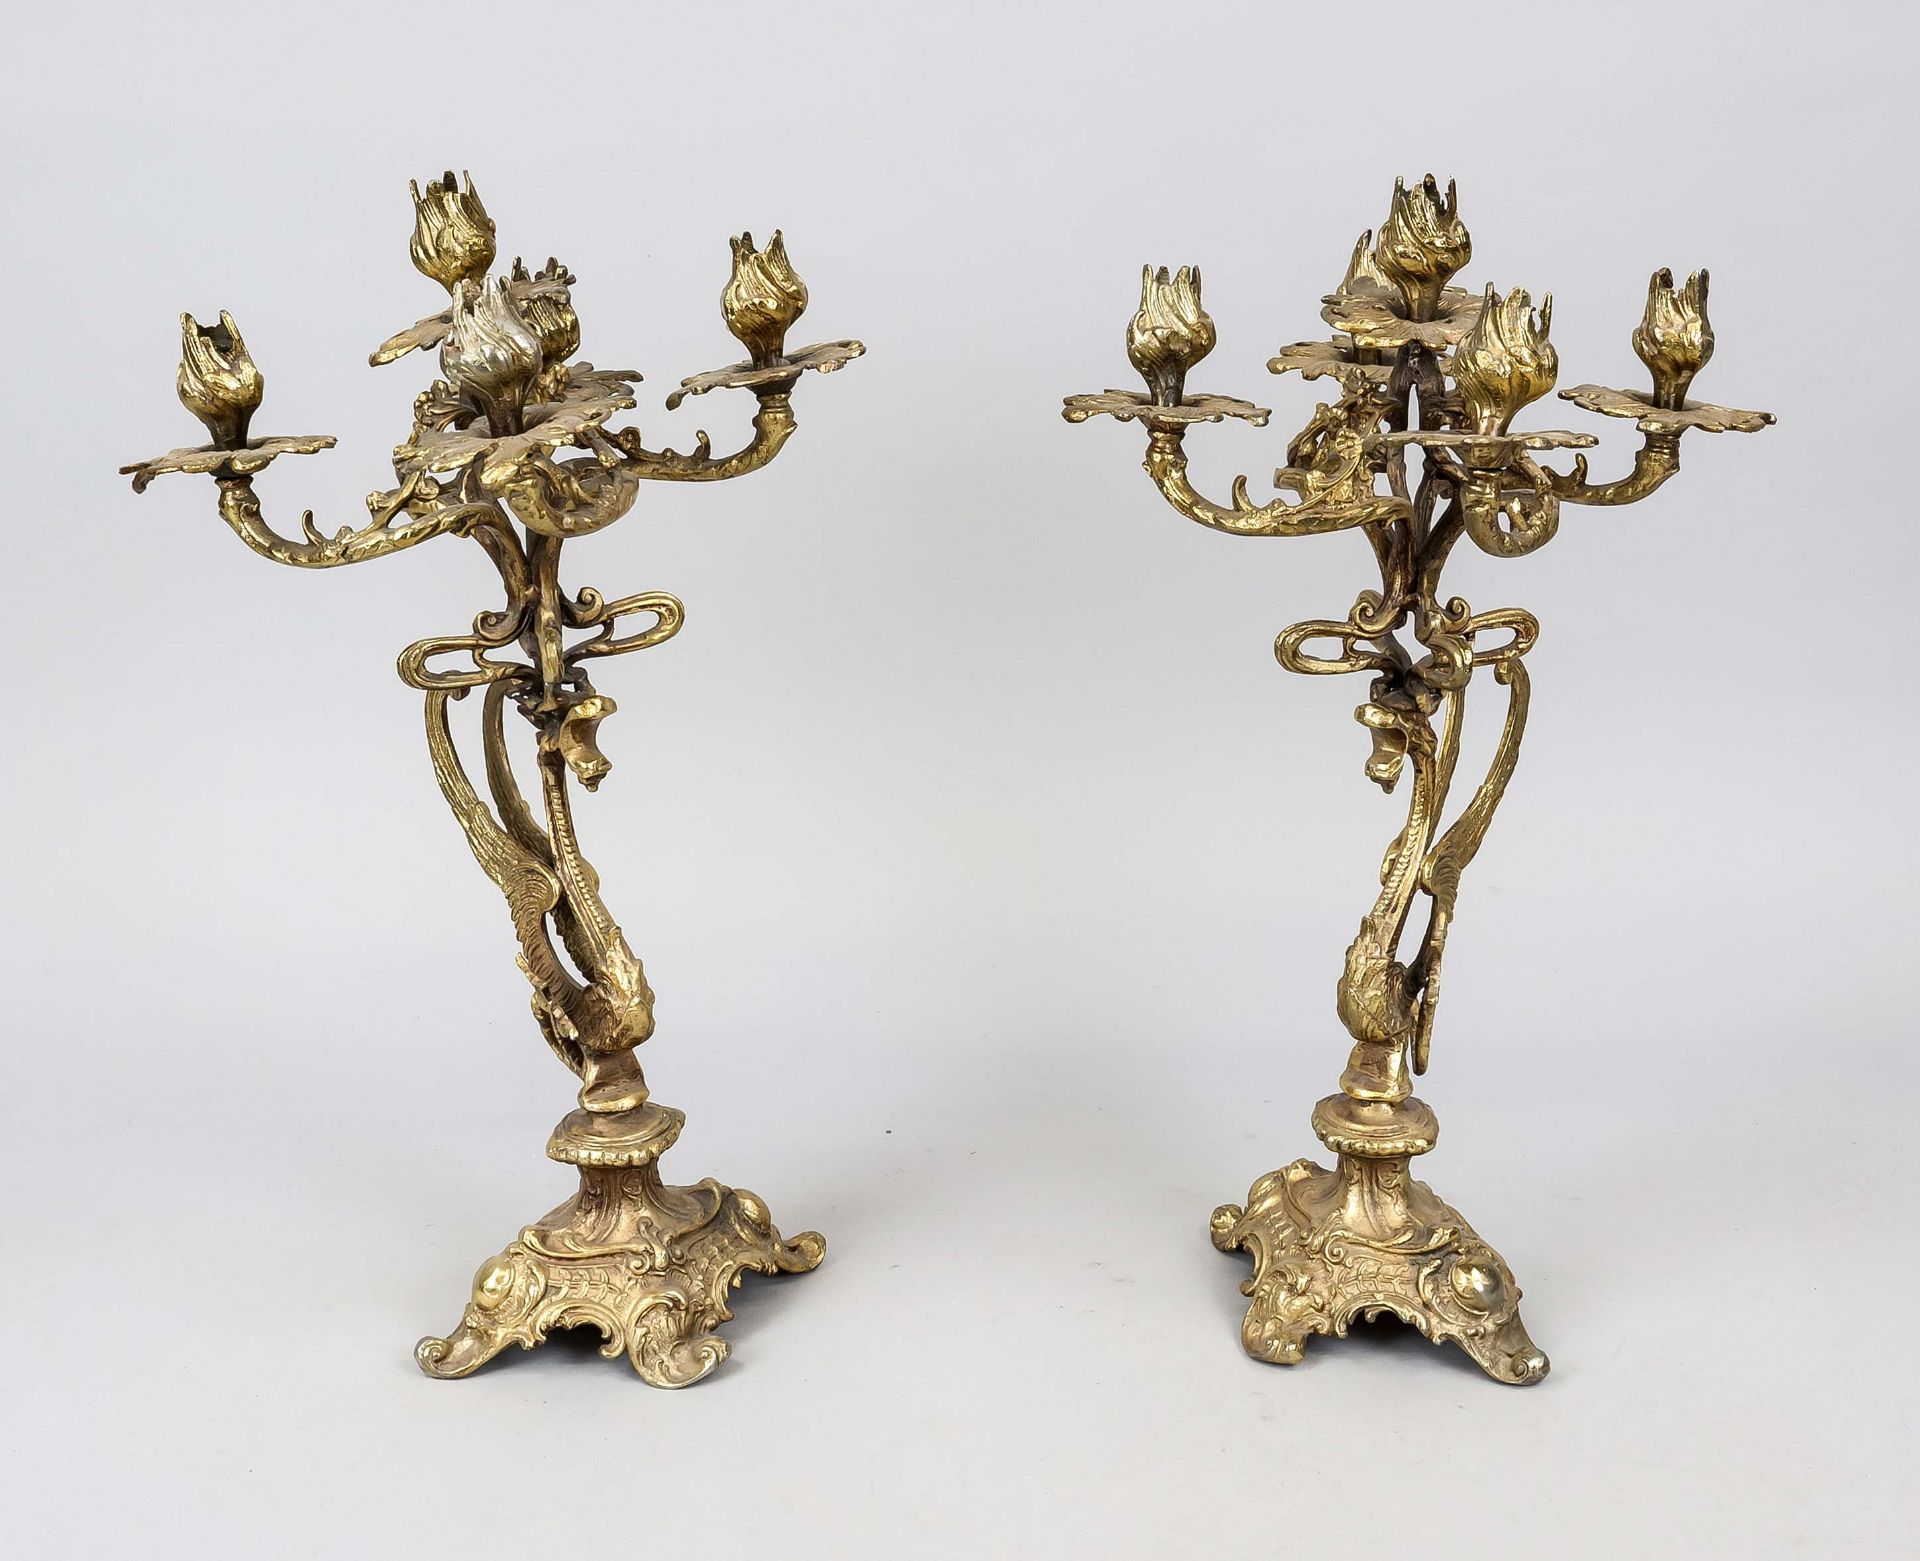 Pair of girandoles, 20th century, brass. Ornamented base, dragon shaft, each with 5 flames, rubbed &